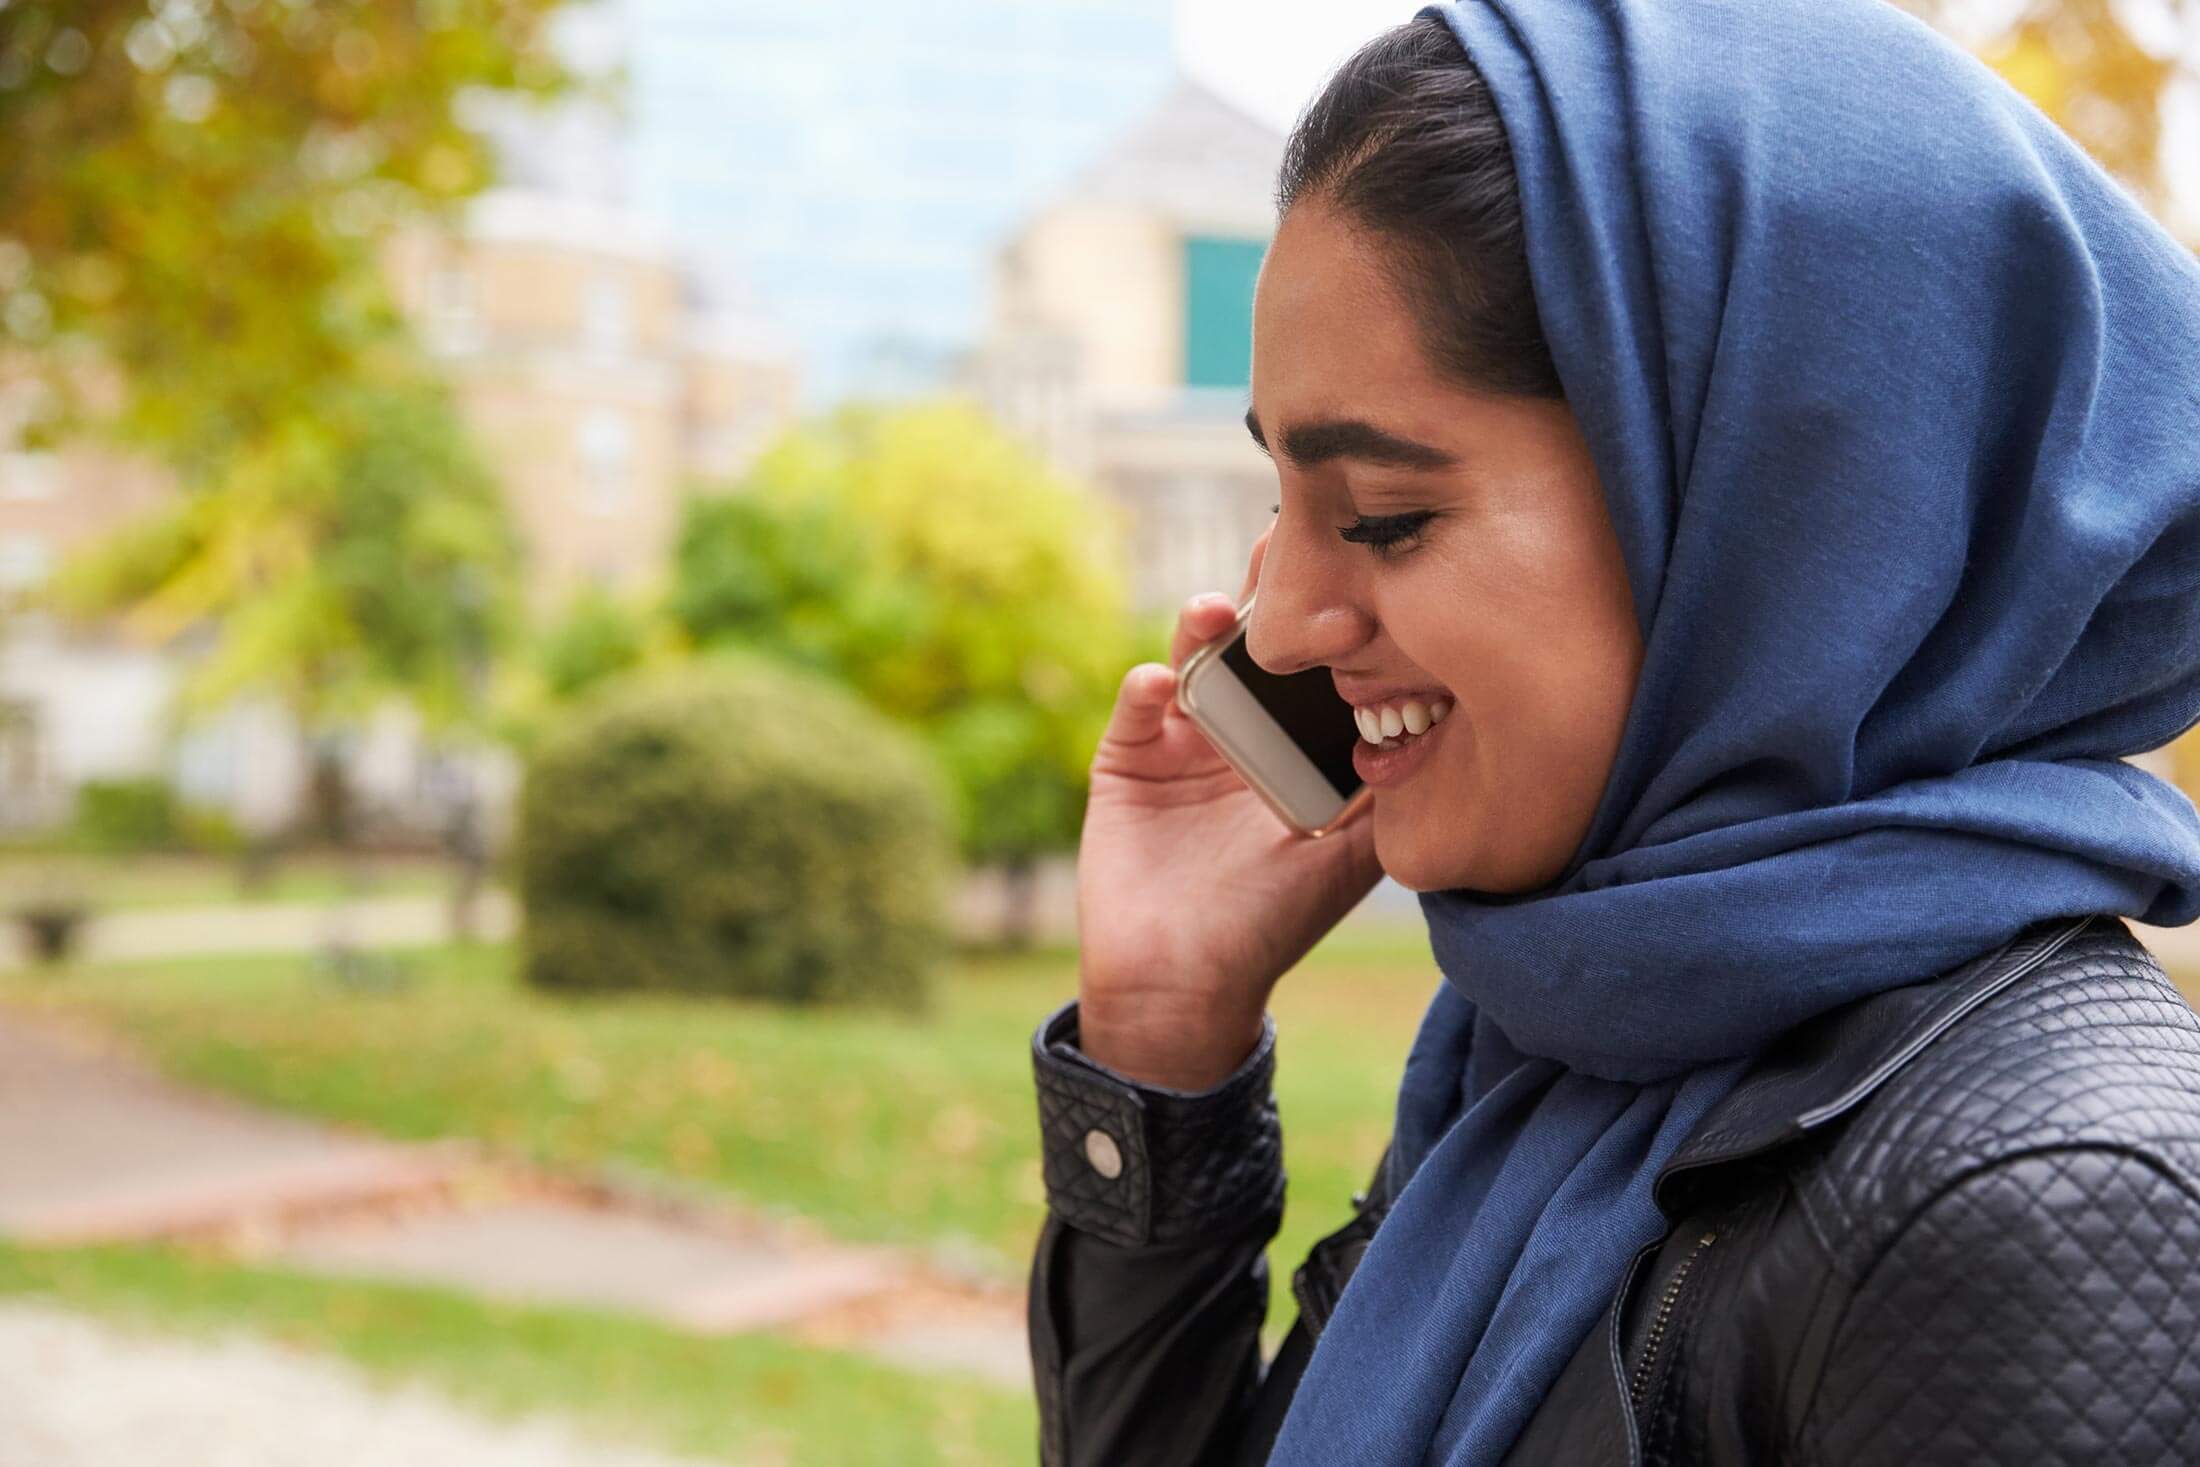 Woman in headscarf smiling while talking on the phone